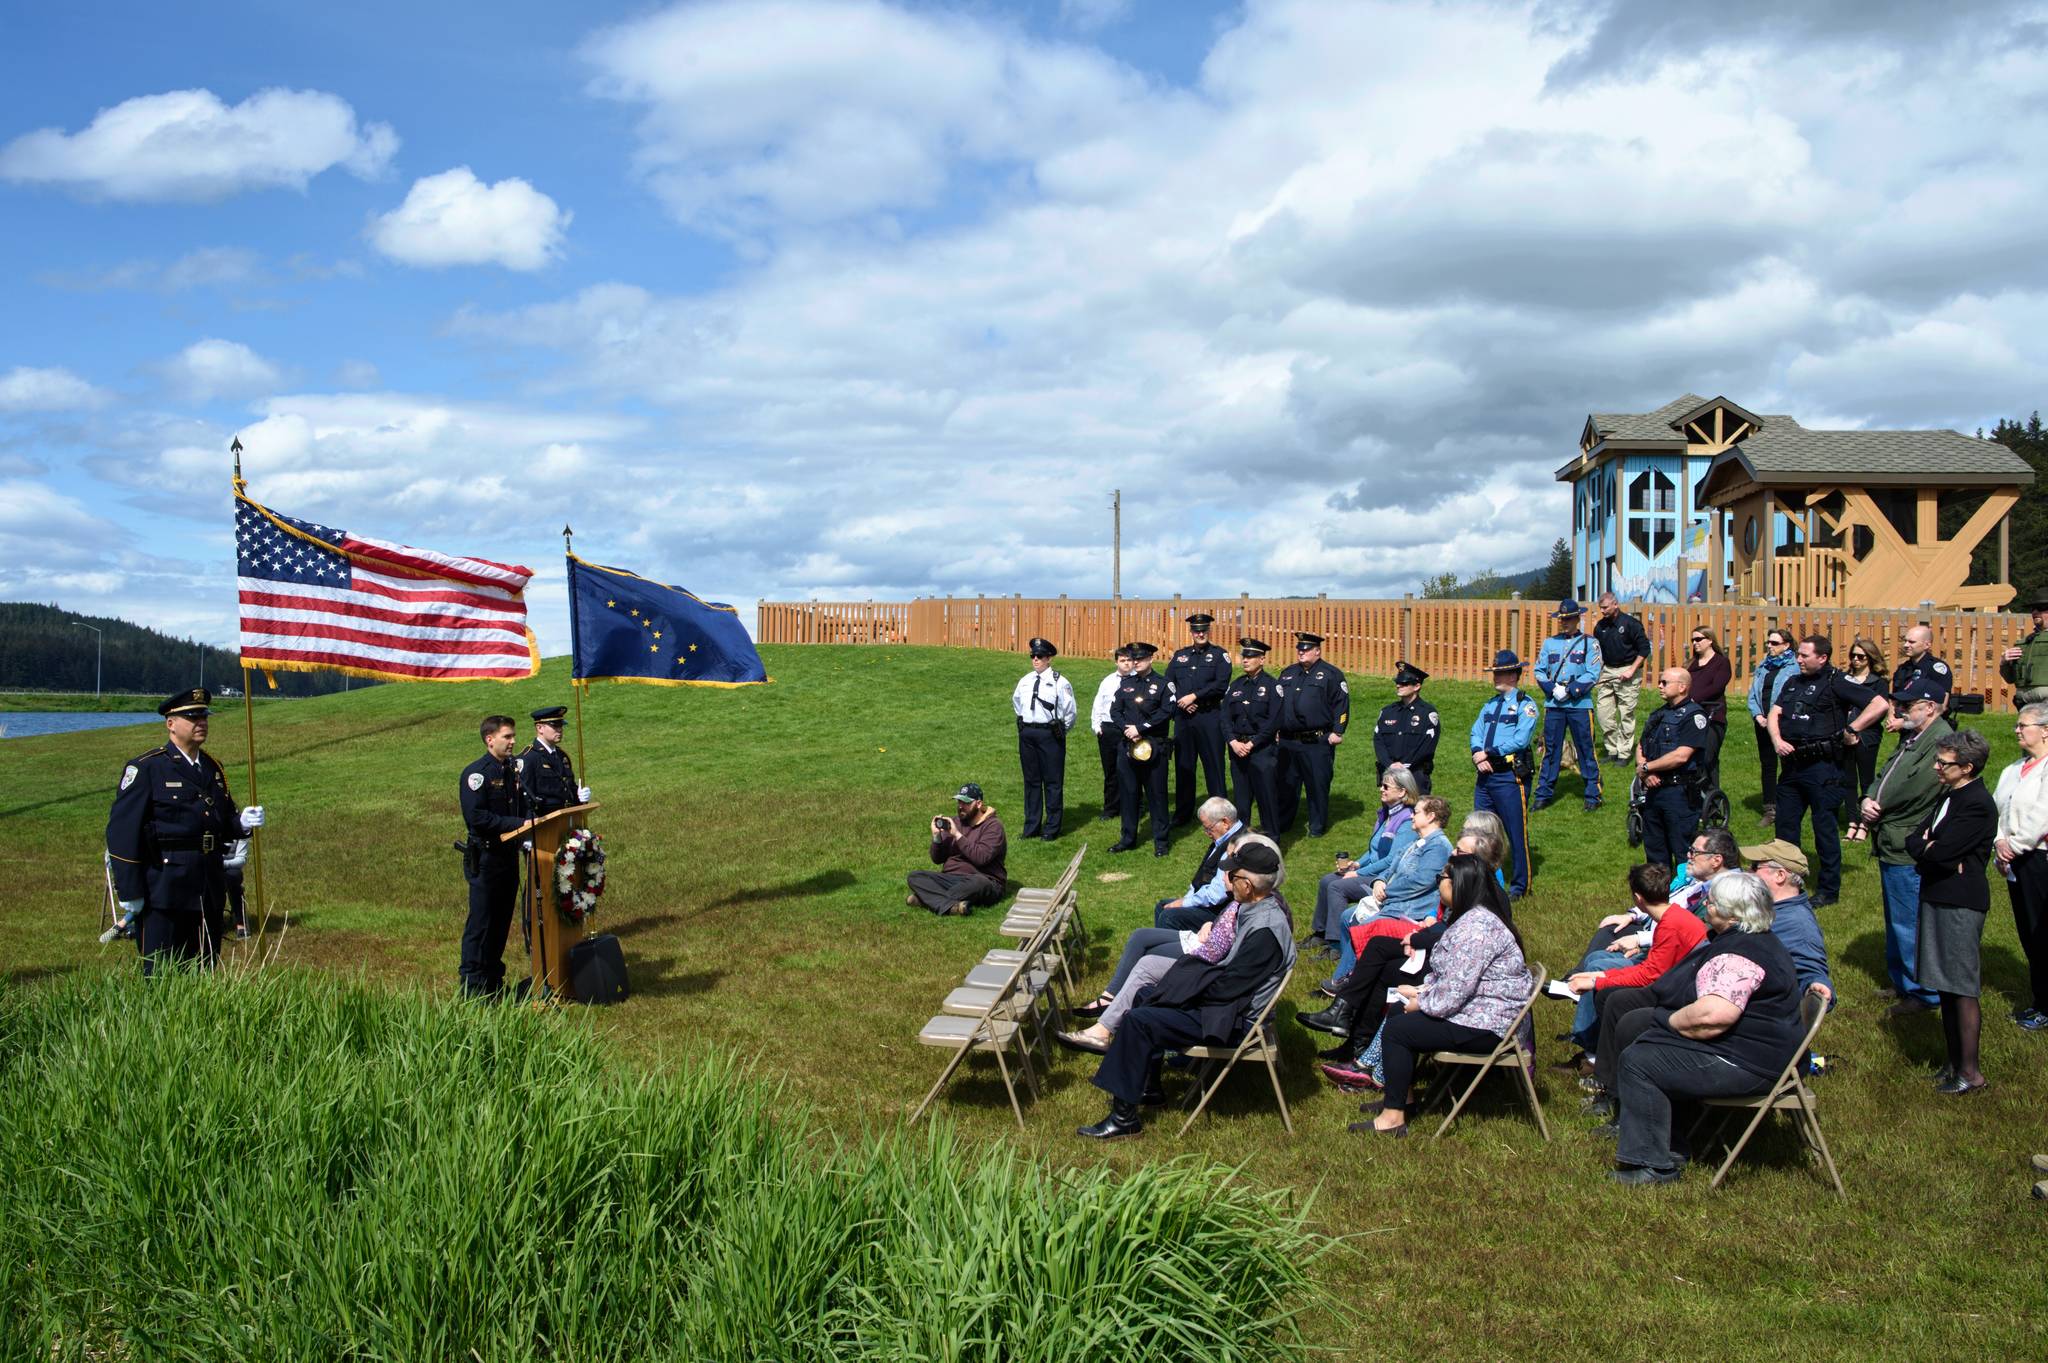 Juneau Police Department’s Lt. Jeremy Weske speaks during a police memorial ceremony at Twin Lakes on Saturday, May 18, 2019. (Michael Penn | Juneau Empire)